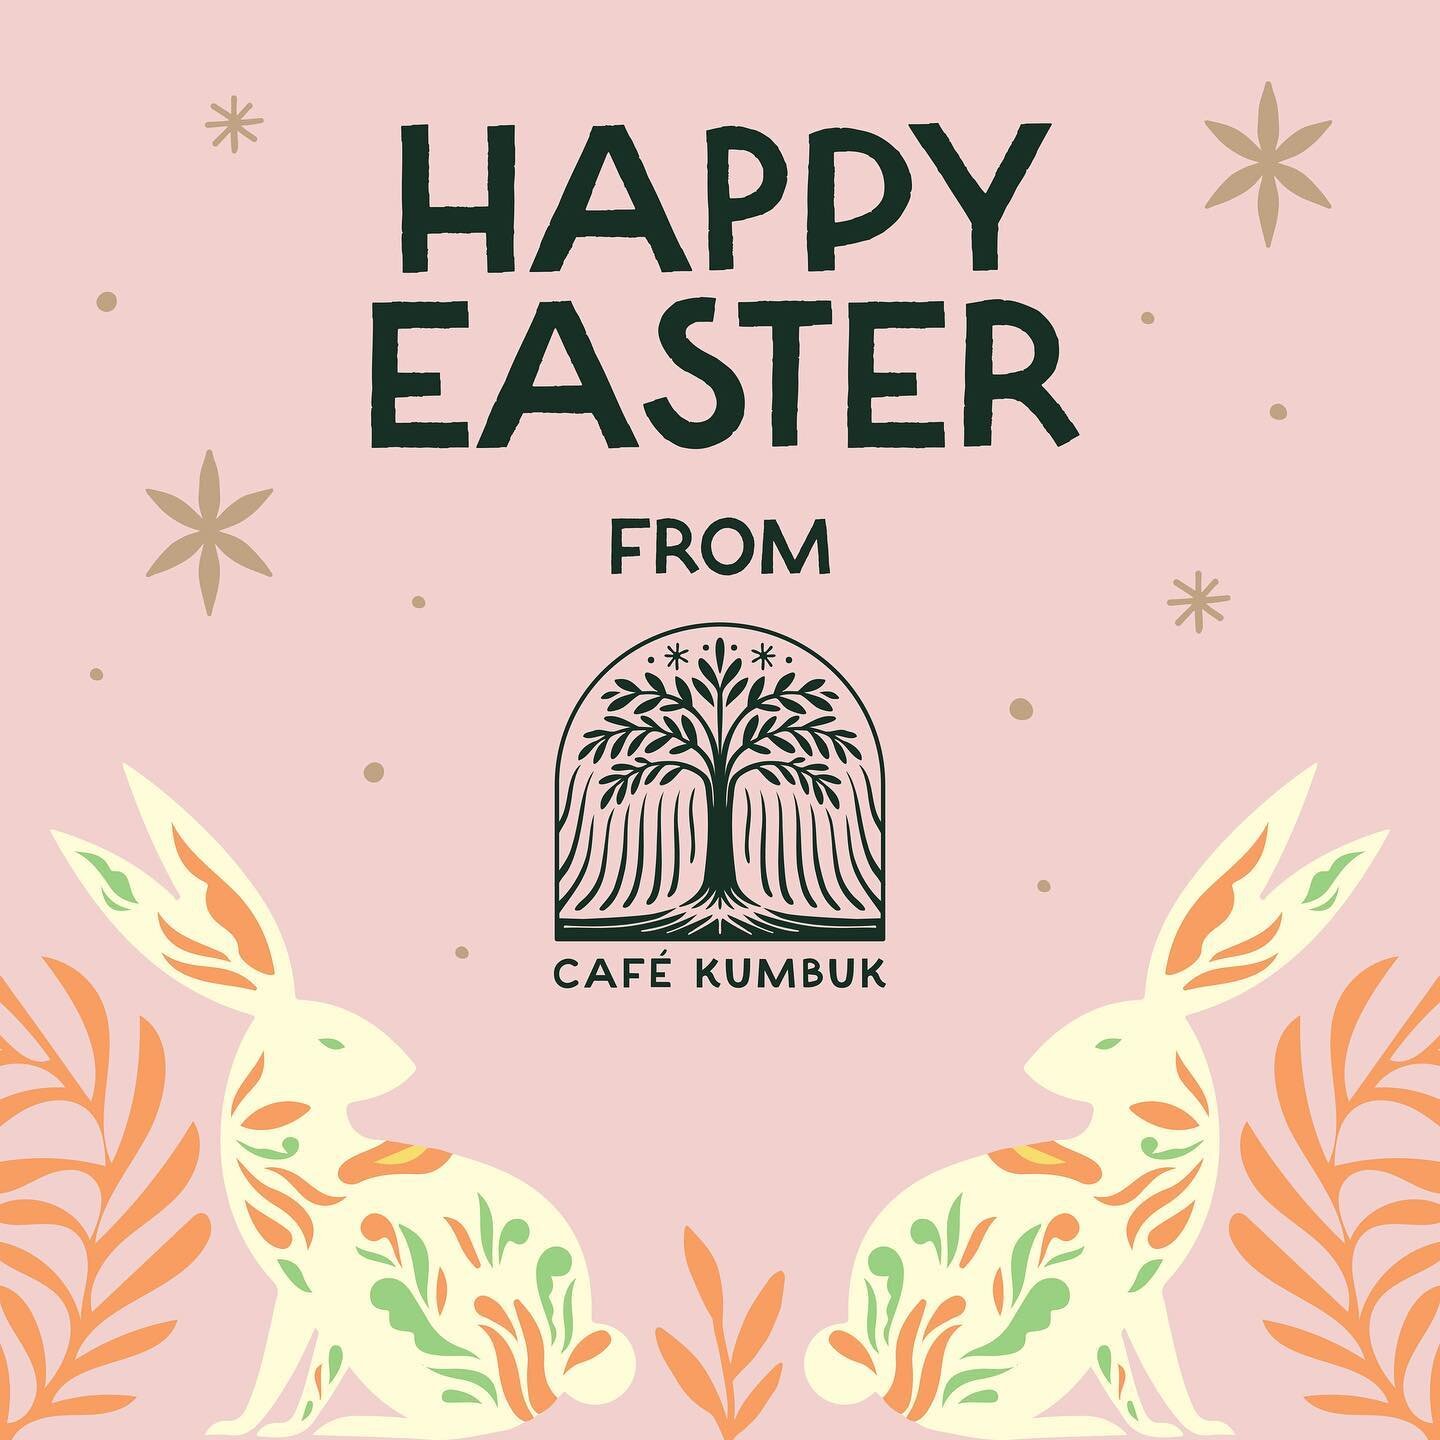 Wishing all those celebrating today a very Happy Easter 🐣 

Cafe Kumbuk is open as usual today! 
.
.
.
.
.
#eastersunday #easter #cafekumbuk #colombocafes #colombosrilanka #colombo #foodie #lka #cmb #eastersunday